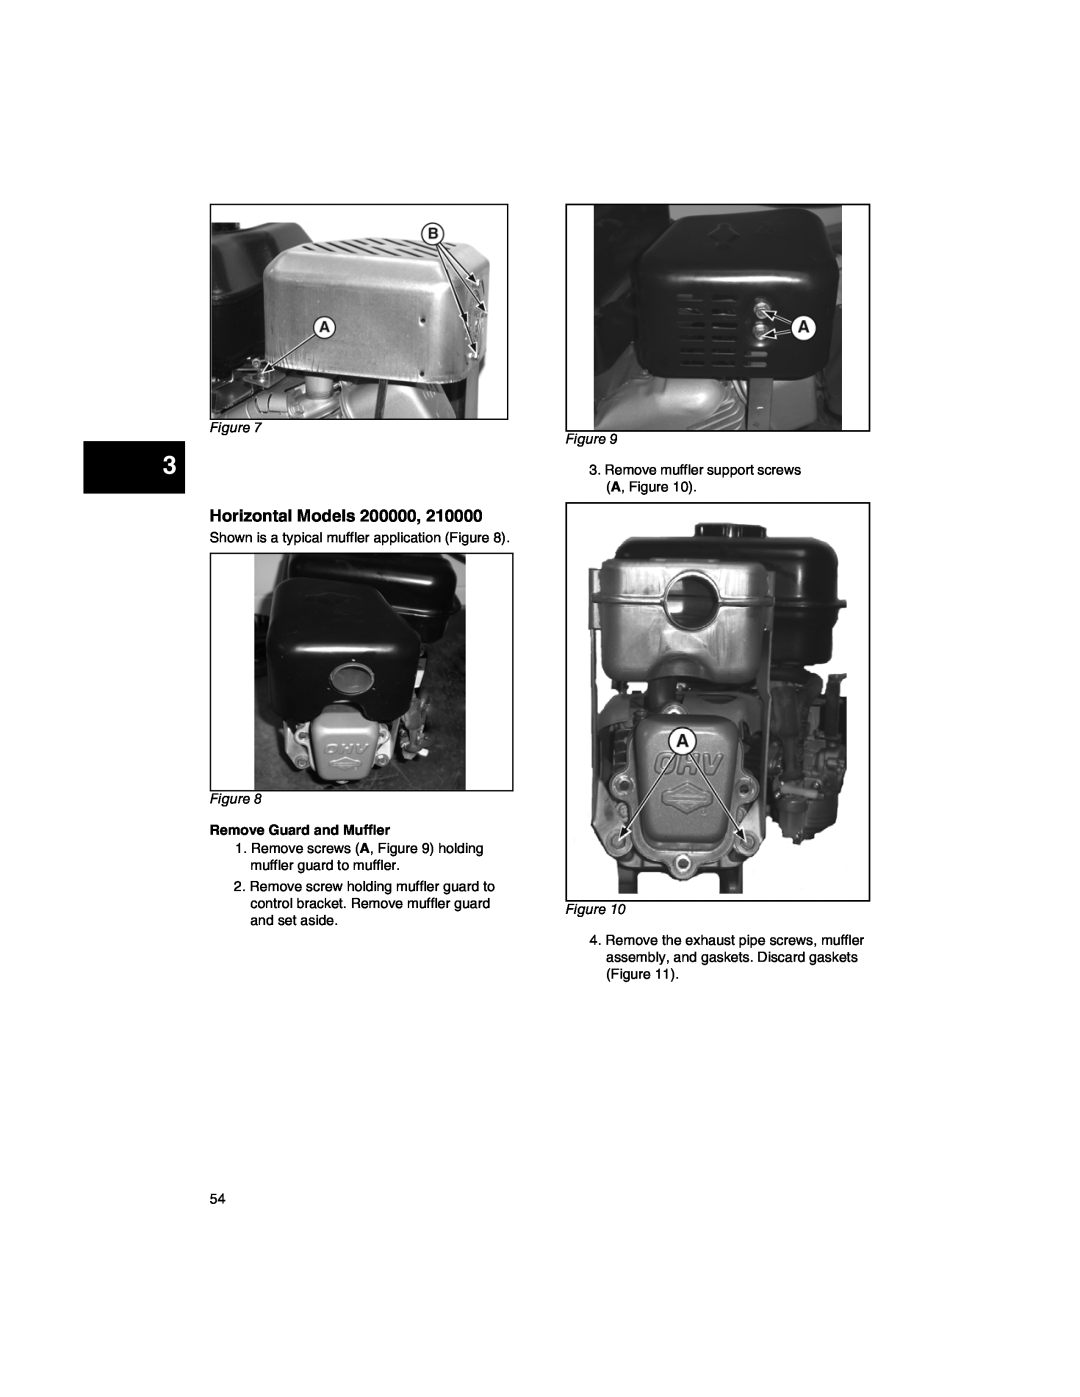 Briggs & Stratton CE8069 Horizontal Models 200000, Shown is a typical muffler application Figure, Remove Guard and Muffler 